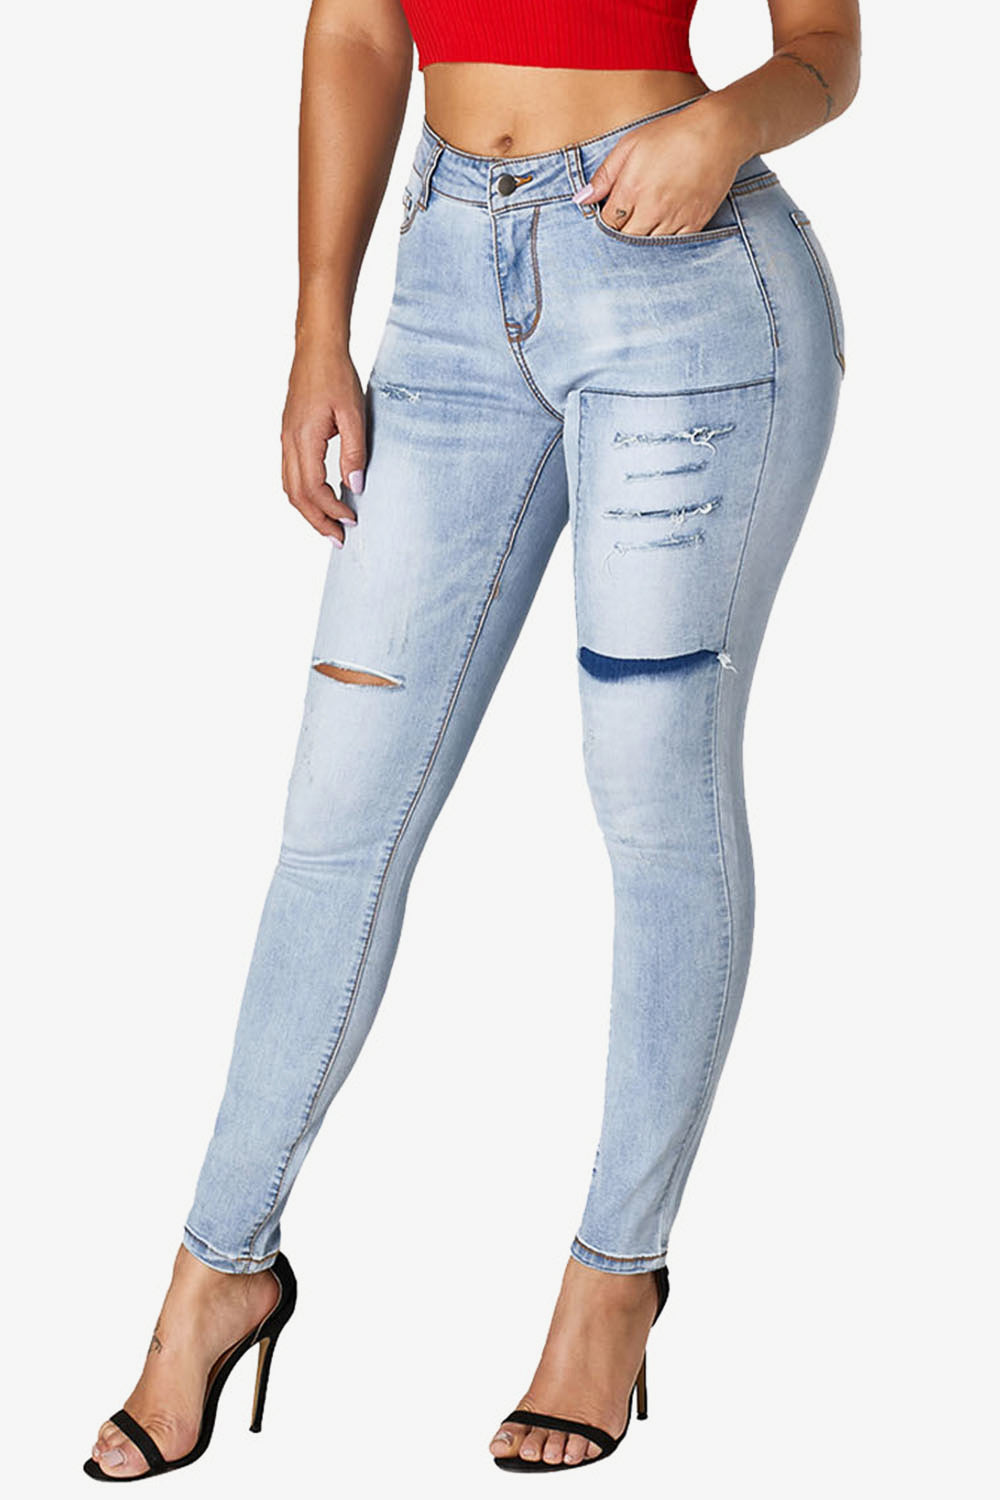 BLUE Acid Wash Ripped Skinny Jeans - women's jeans at TFC&H Co.